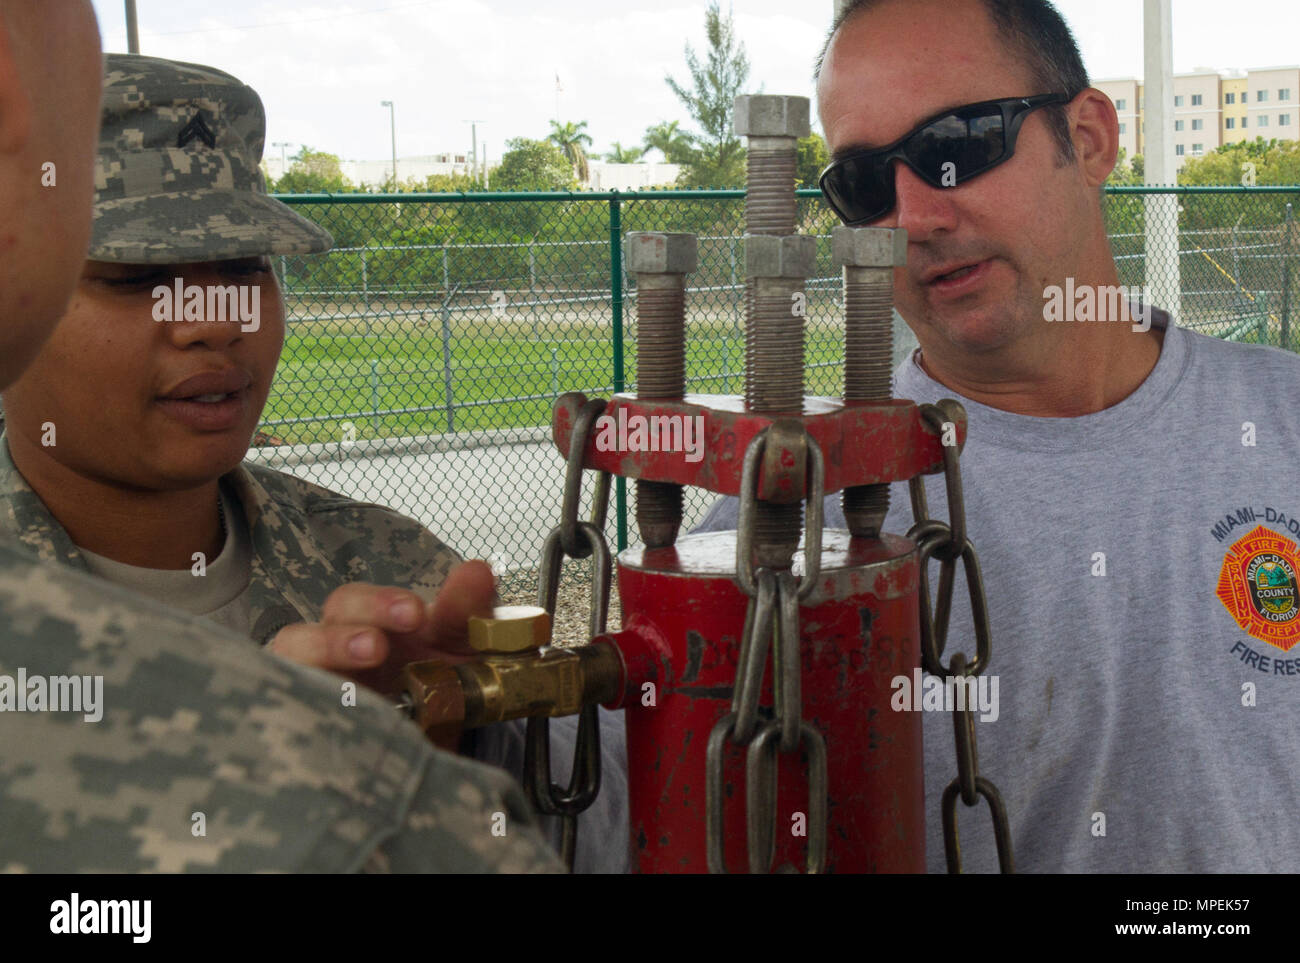 Firefighter David Guerra, a flight medic with the Miami-Dade Fire Rescue Department (MDFR), assists Army Reserve Cpl. Shalandis Johnson on how to cap a gas cylinder during training at the MDFR training facility on Feb. 17, 2017 in Doral, Fla. Johnson, who lives in Orlando, Fla., is a Chemical, Biological, Radiological, and Nuclear (CBRN) Specialist assigned to the 329th CBRN Company (Reconnaissance and Surveillance), which is based in Orlando. The 329th CBRN Company, the Army Reserve’s 469th Ground Ambulance Company, from Wichita, Kan., and the Florida National Guard’s Civil Support Team, spen Stock Photo